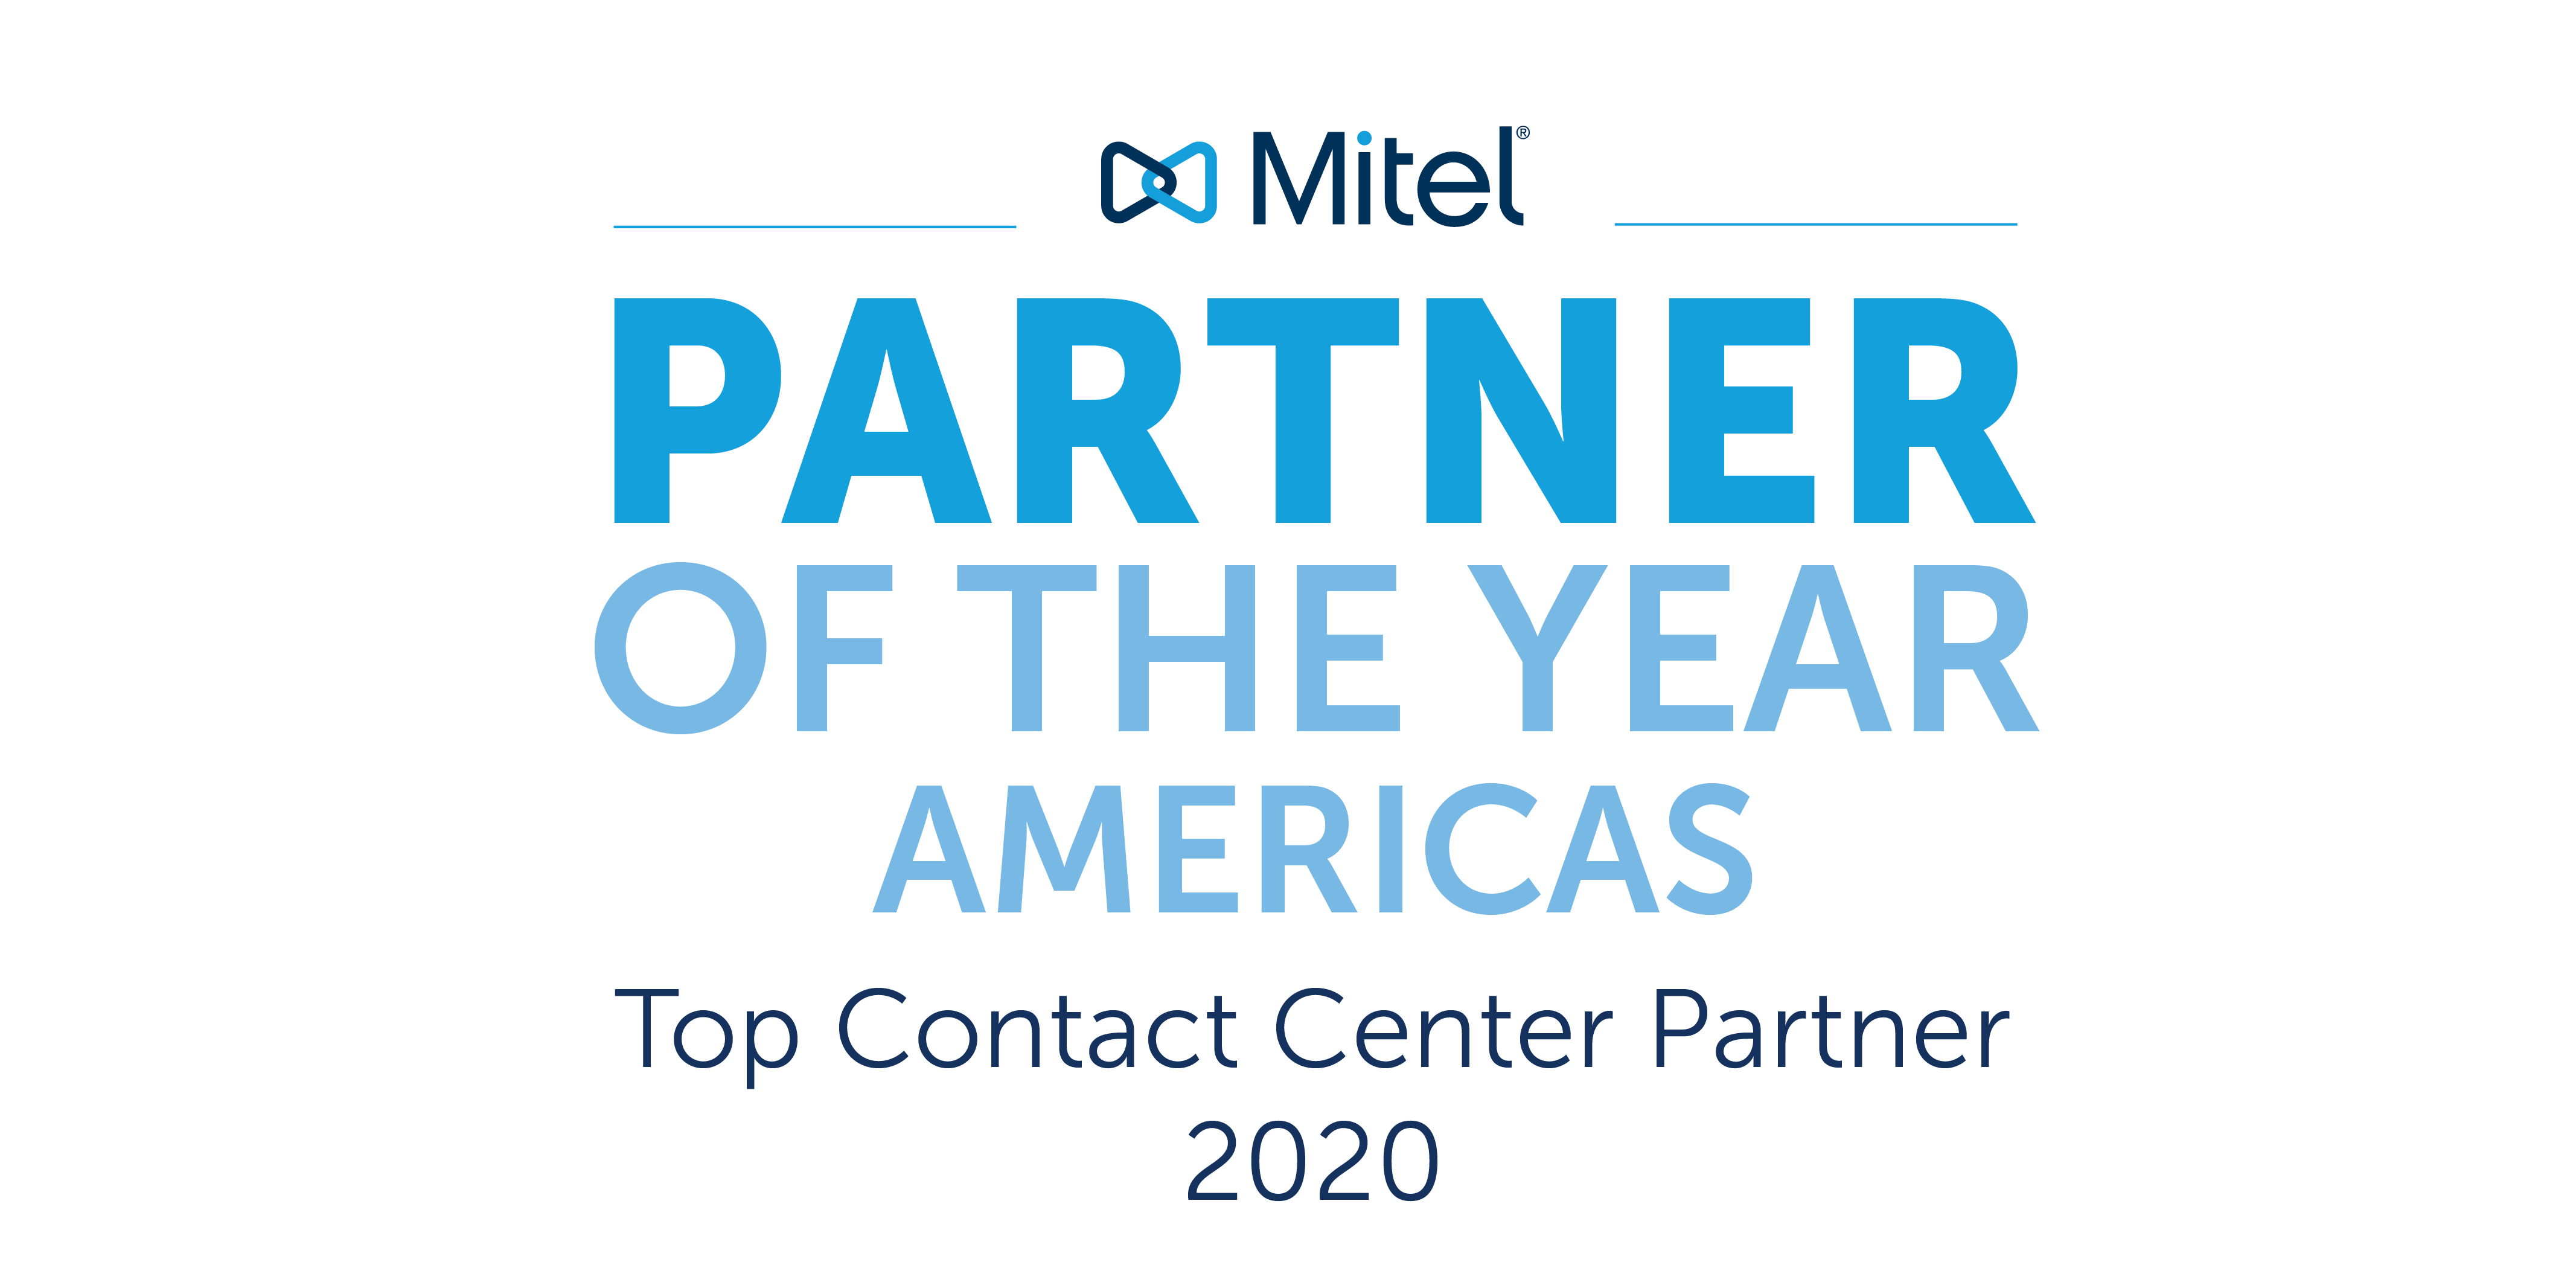 Partner of the Year Americas - Top Government and Top Contact Center Partner 2020